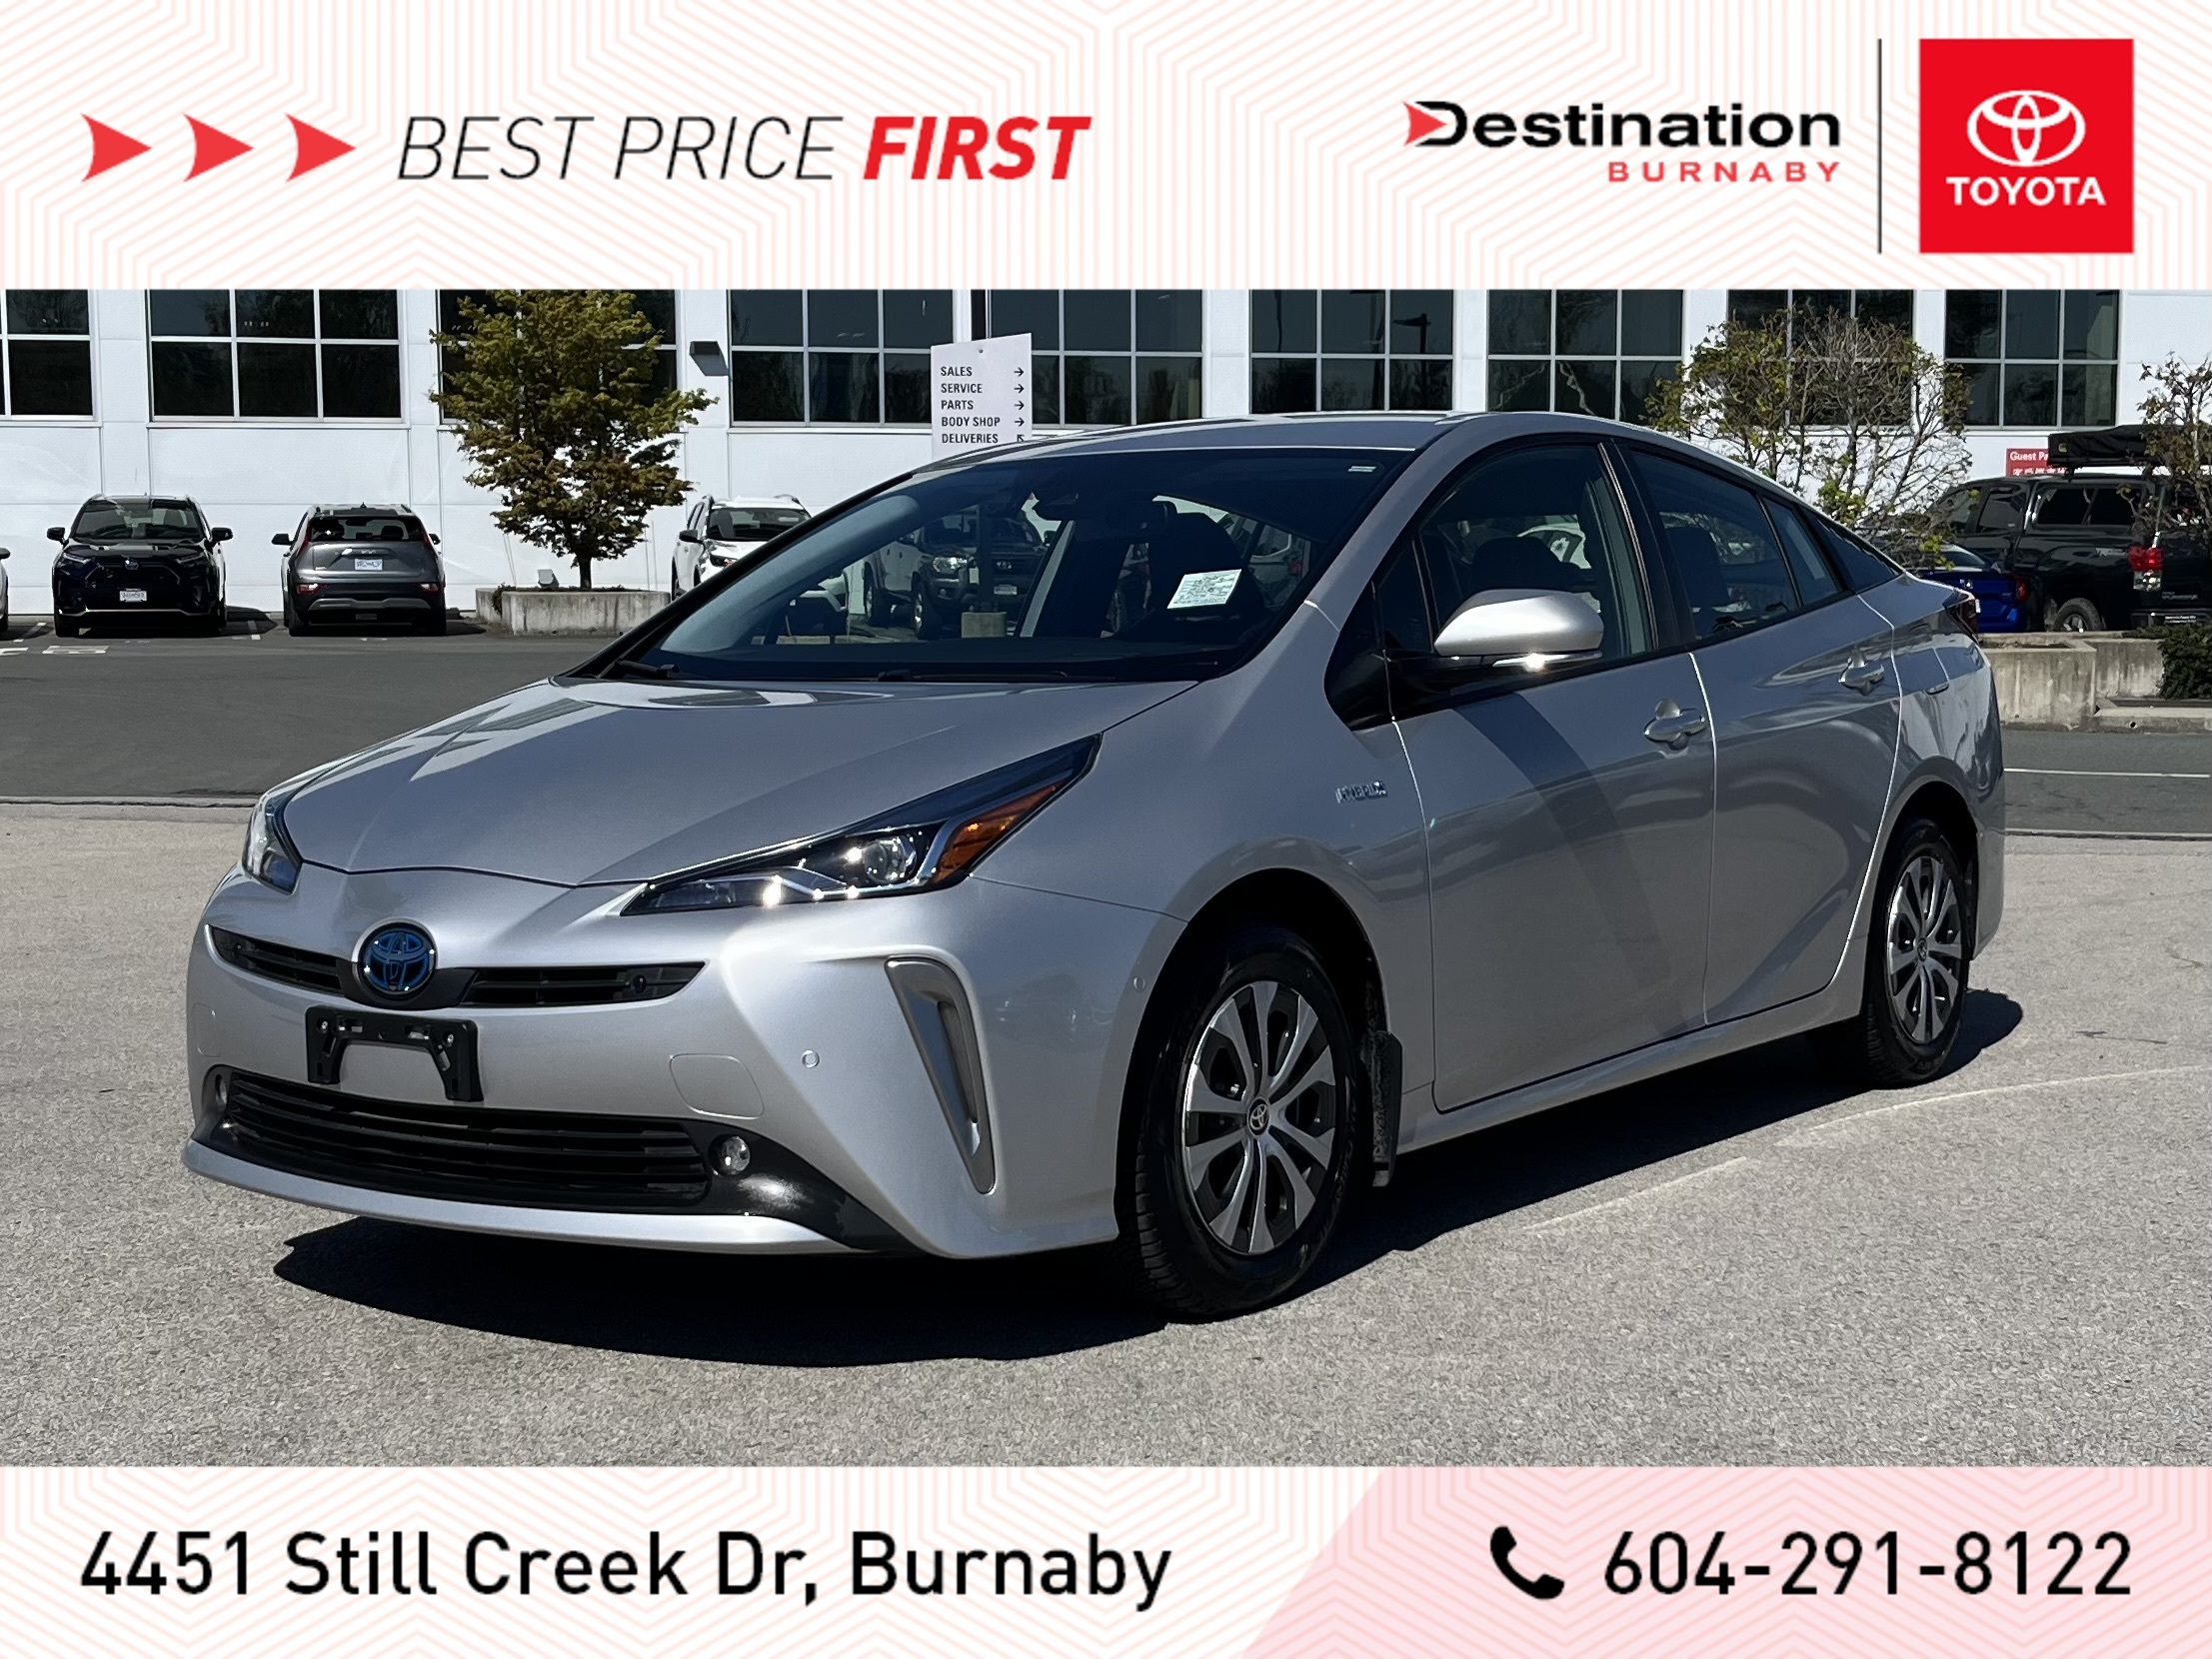 2019 Toyota Prius Technology Advanced AWD-e CVT, One owner, Low Kms